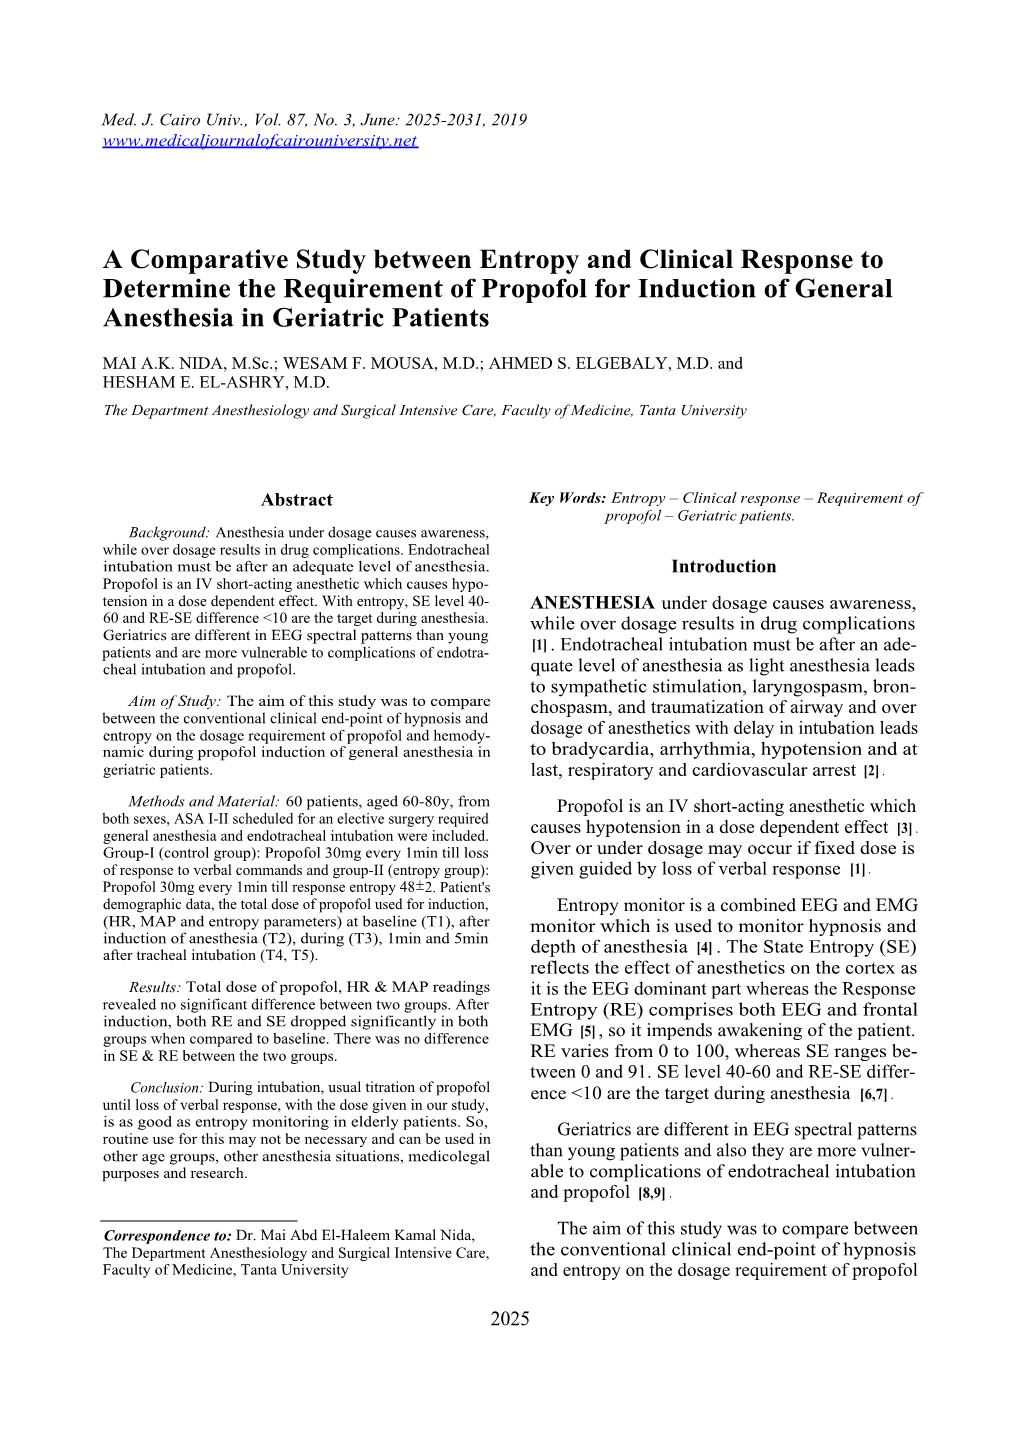 A Comparative Study Between Entropy and Clinical Response To